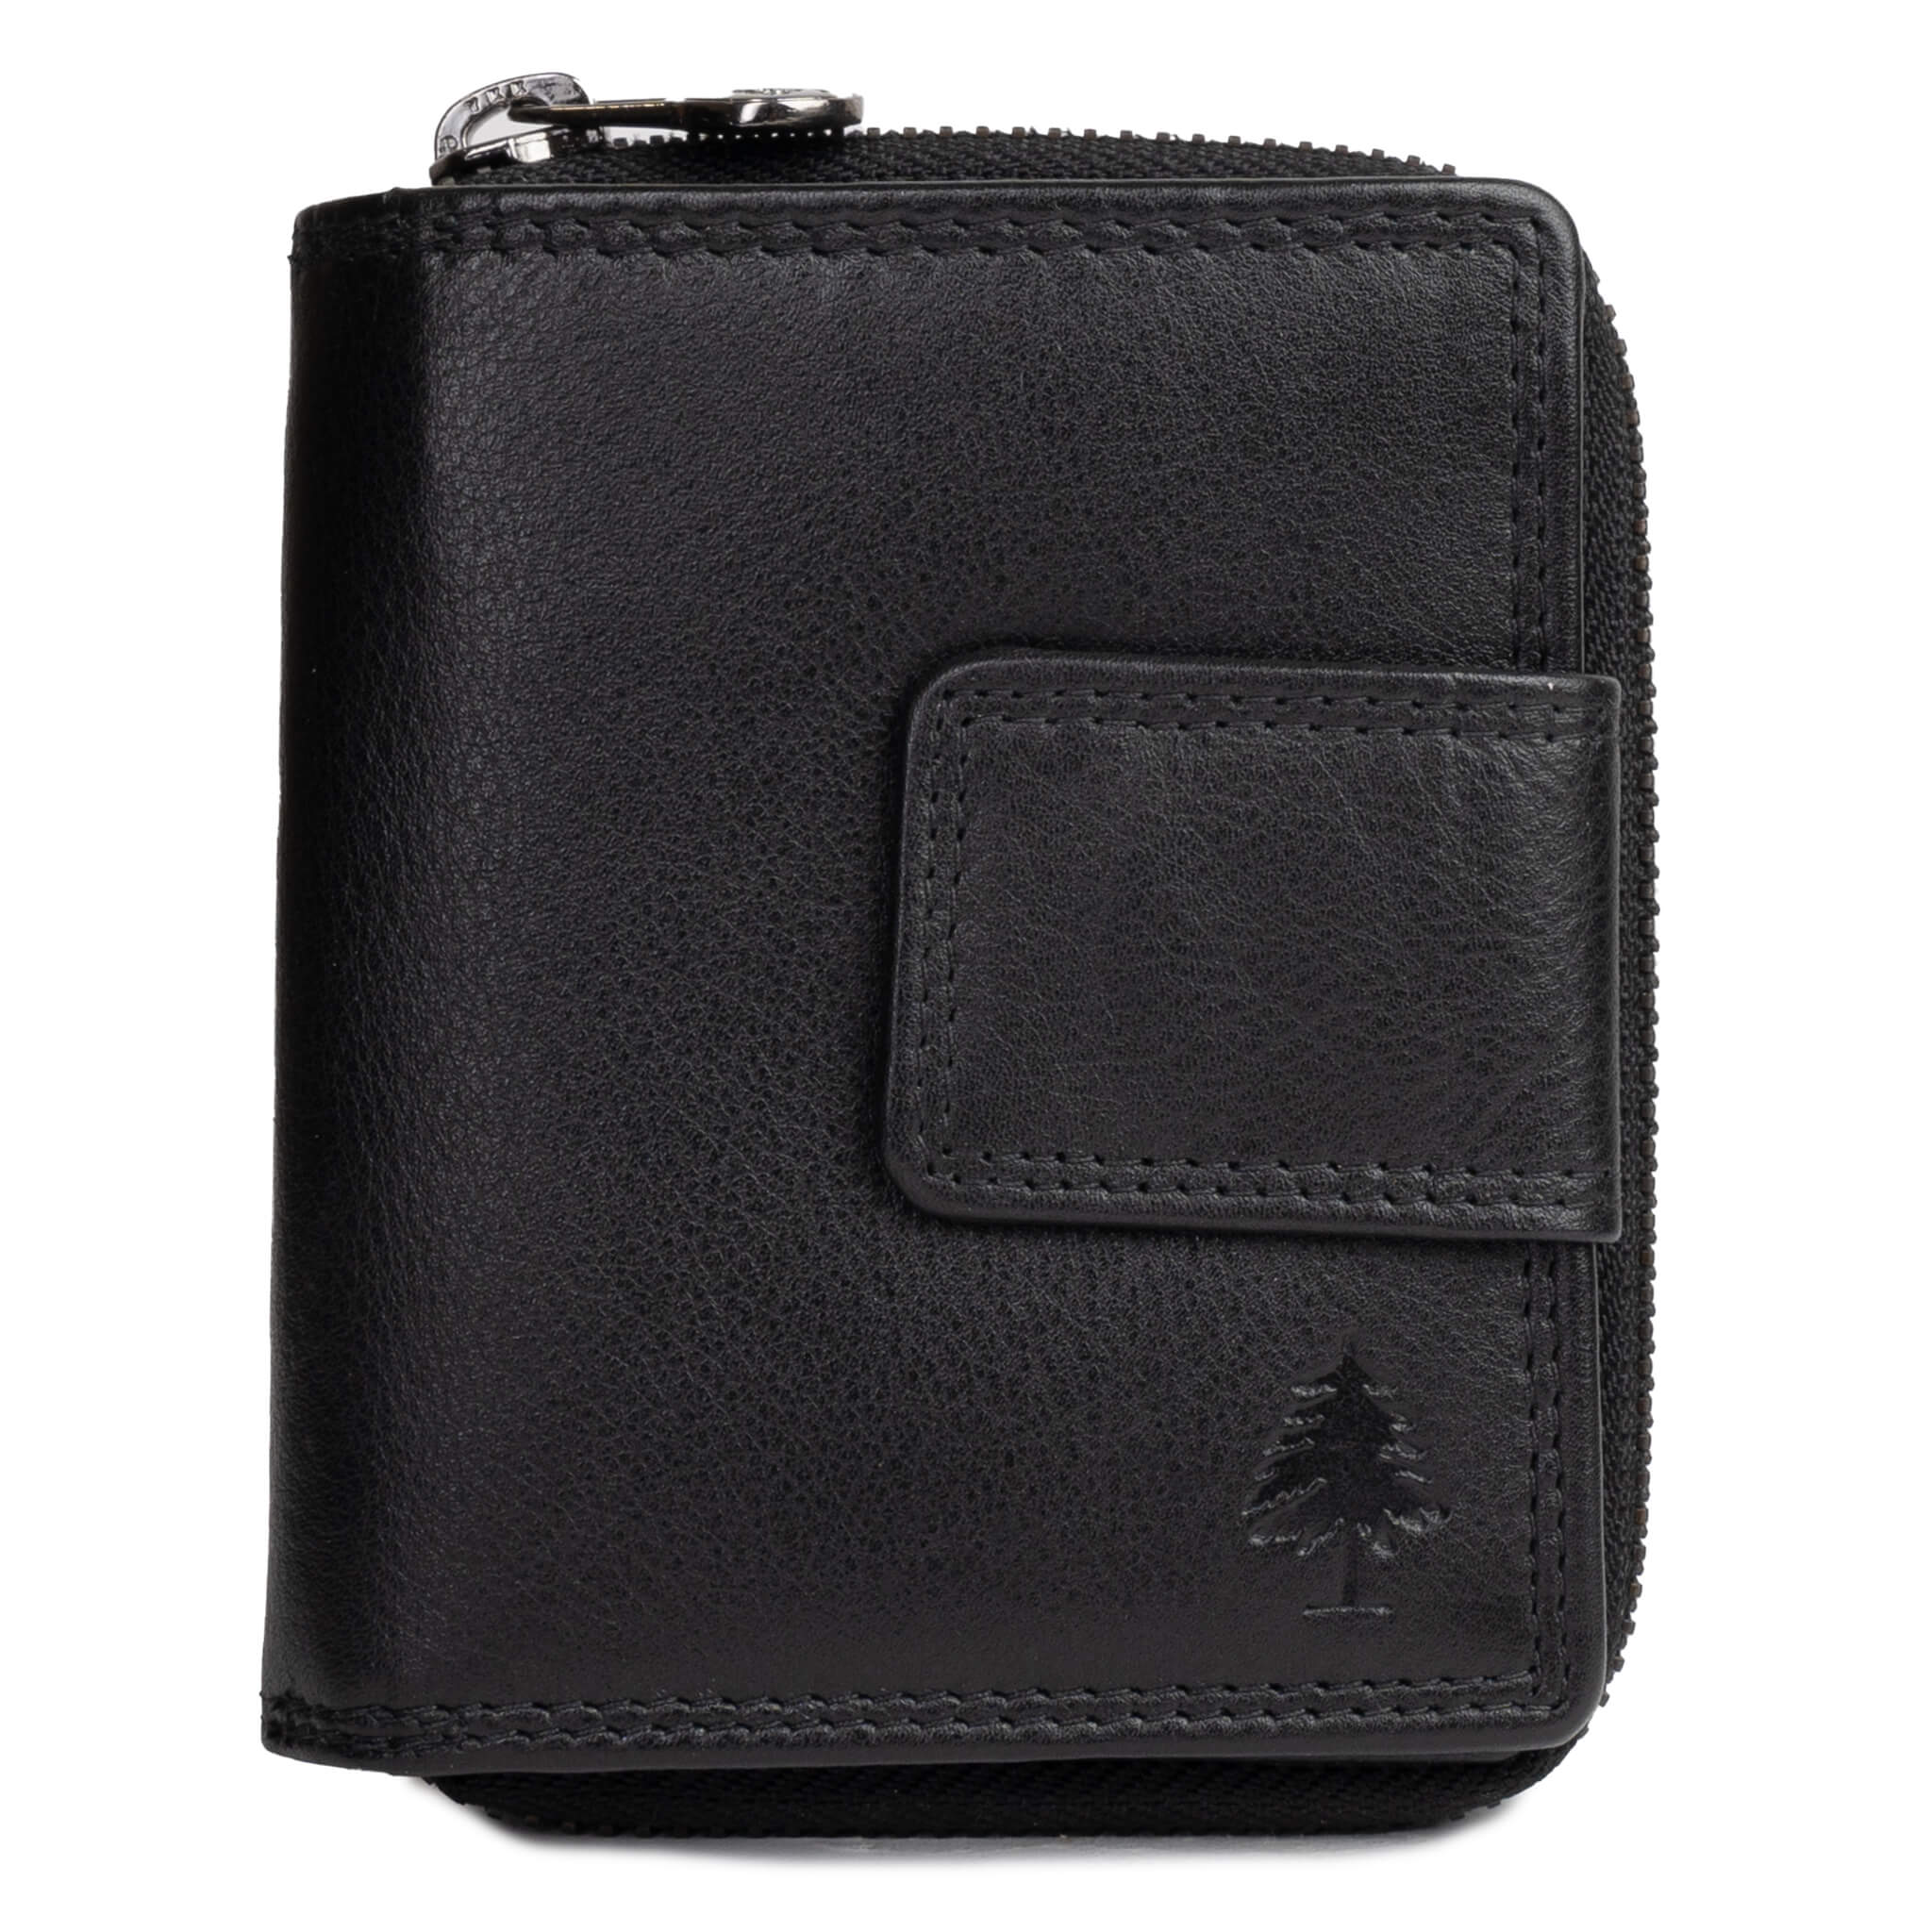 Akiro Small Leather Wallet Women with Zip Compartment Men